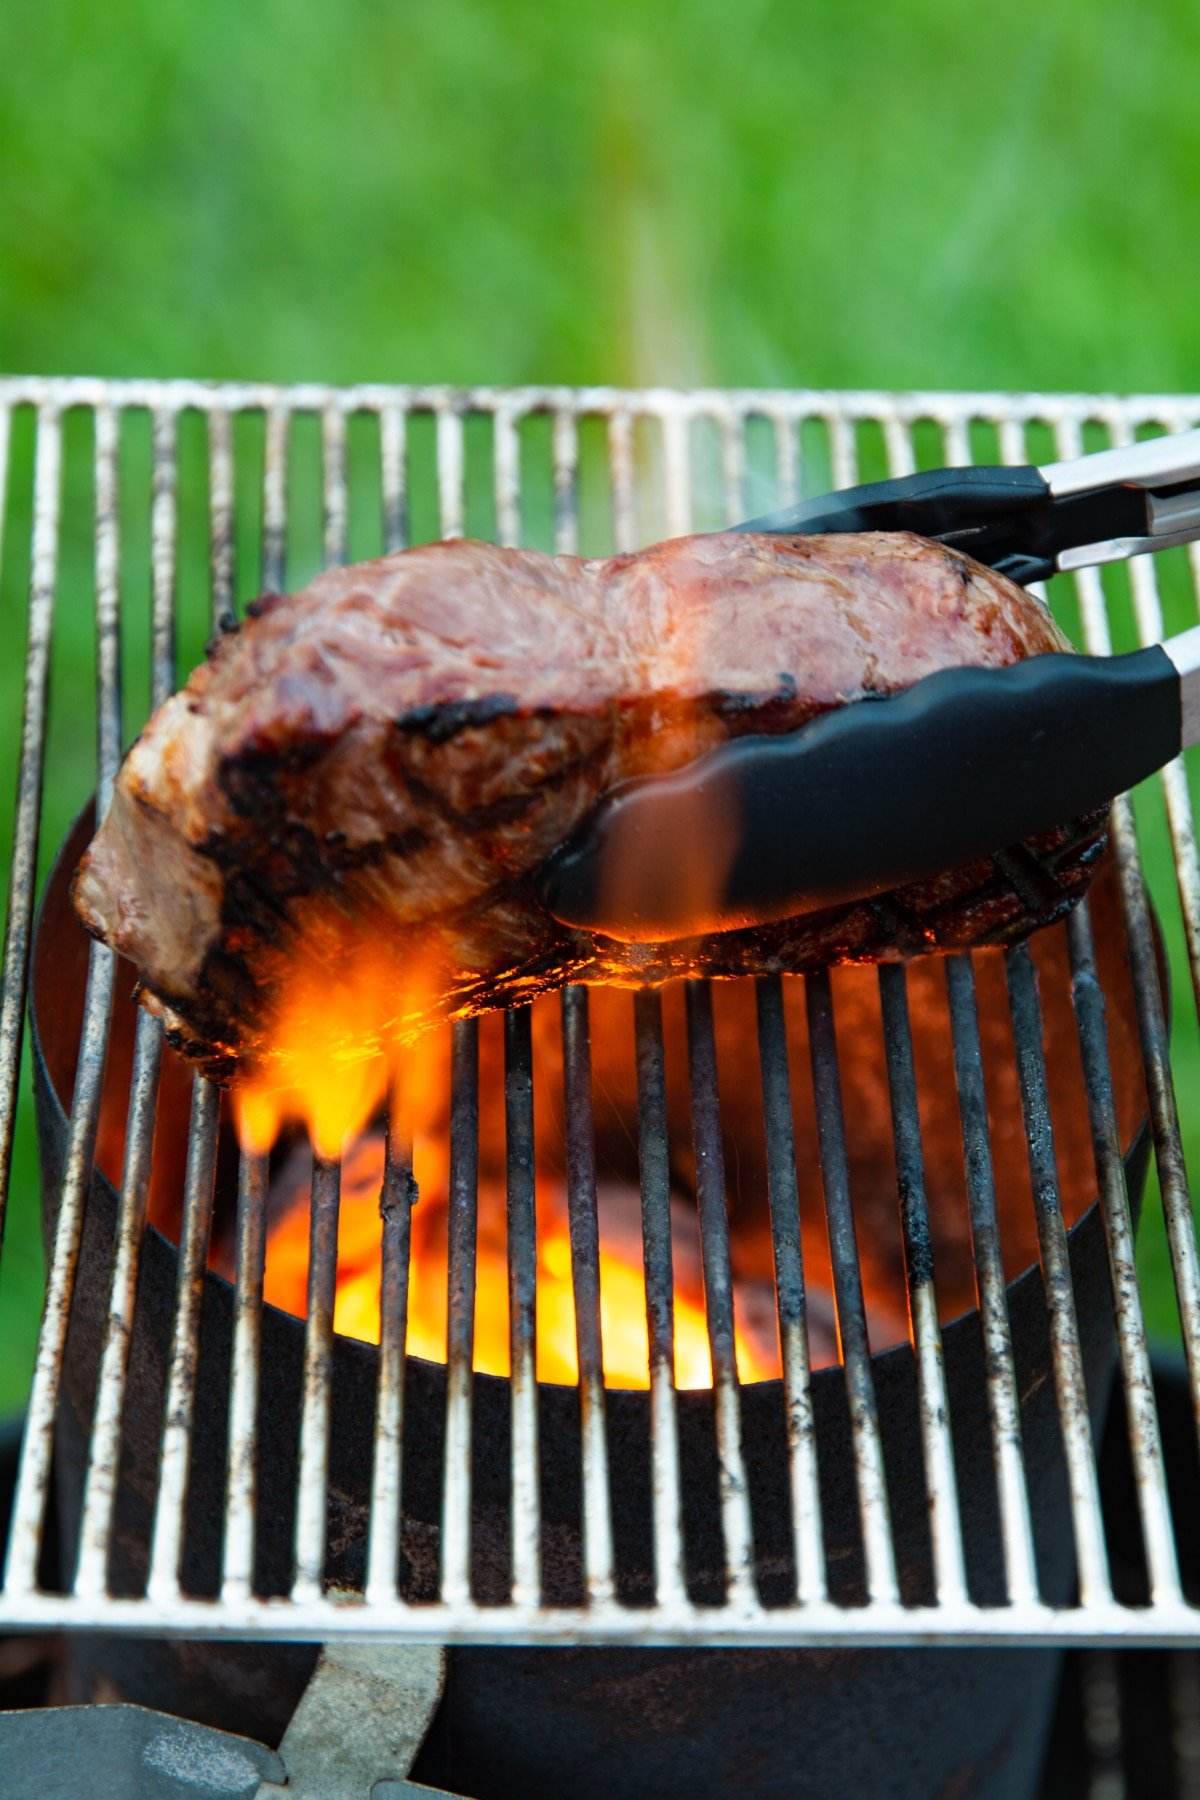 Steak cooking on a grill, cooking the sides